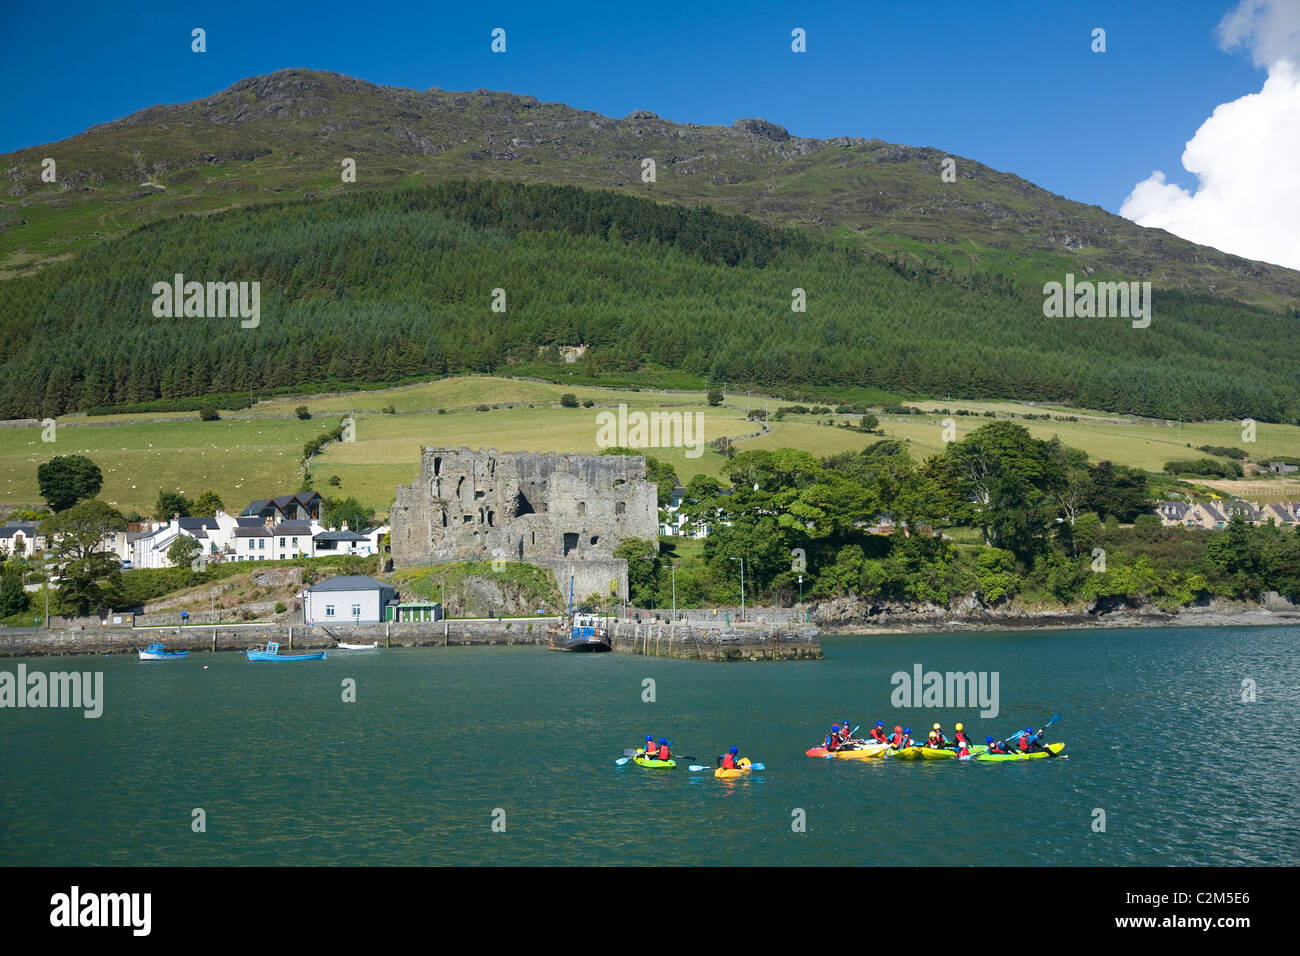 Sea kayaking group in Carlingford Lough, beneath Slieve Foy. County Louth, Ireland. Stock Photo